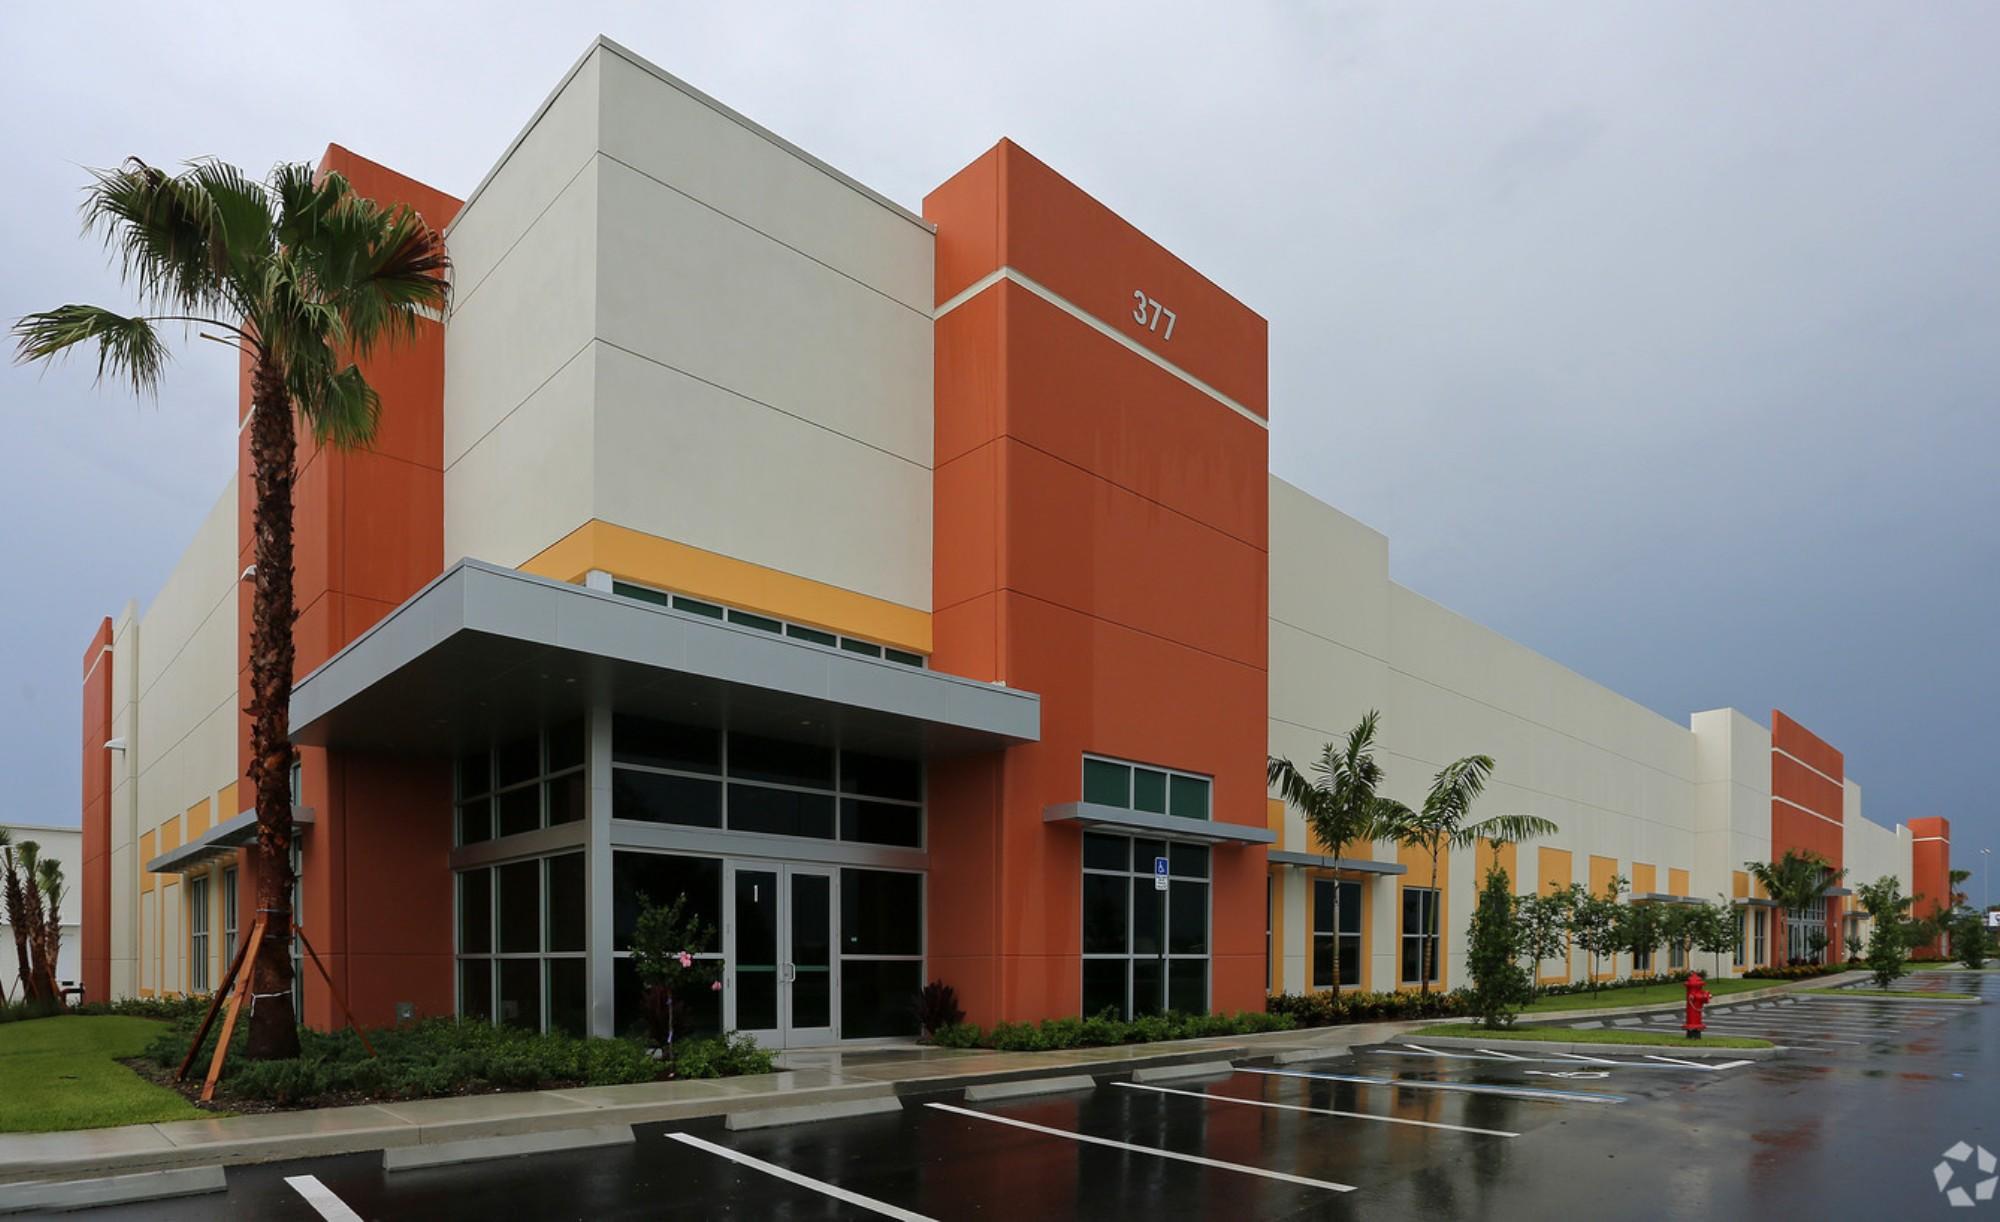 377 North Cleary Road in West Palm Beach (Credit: LoopNet)